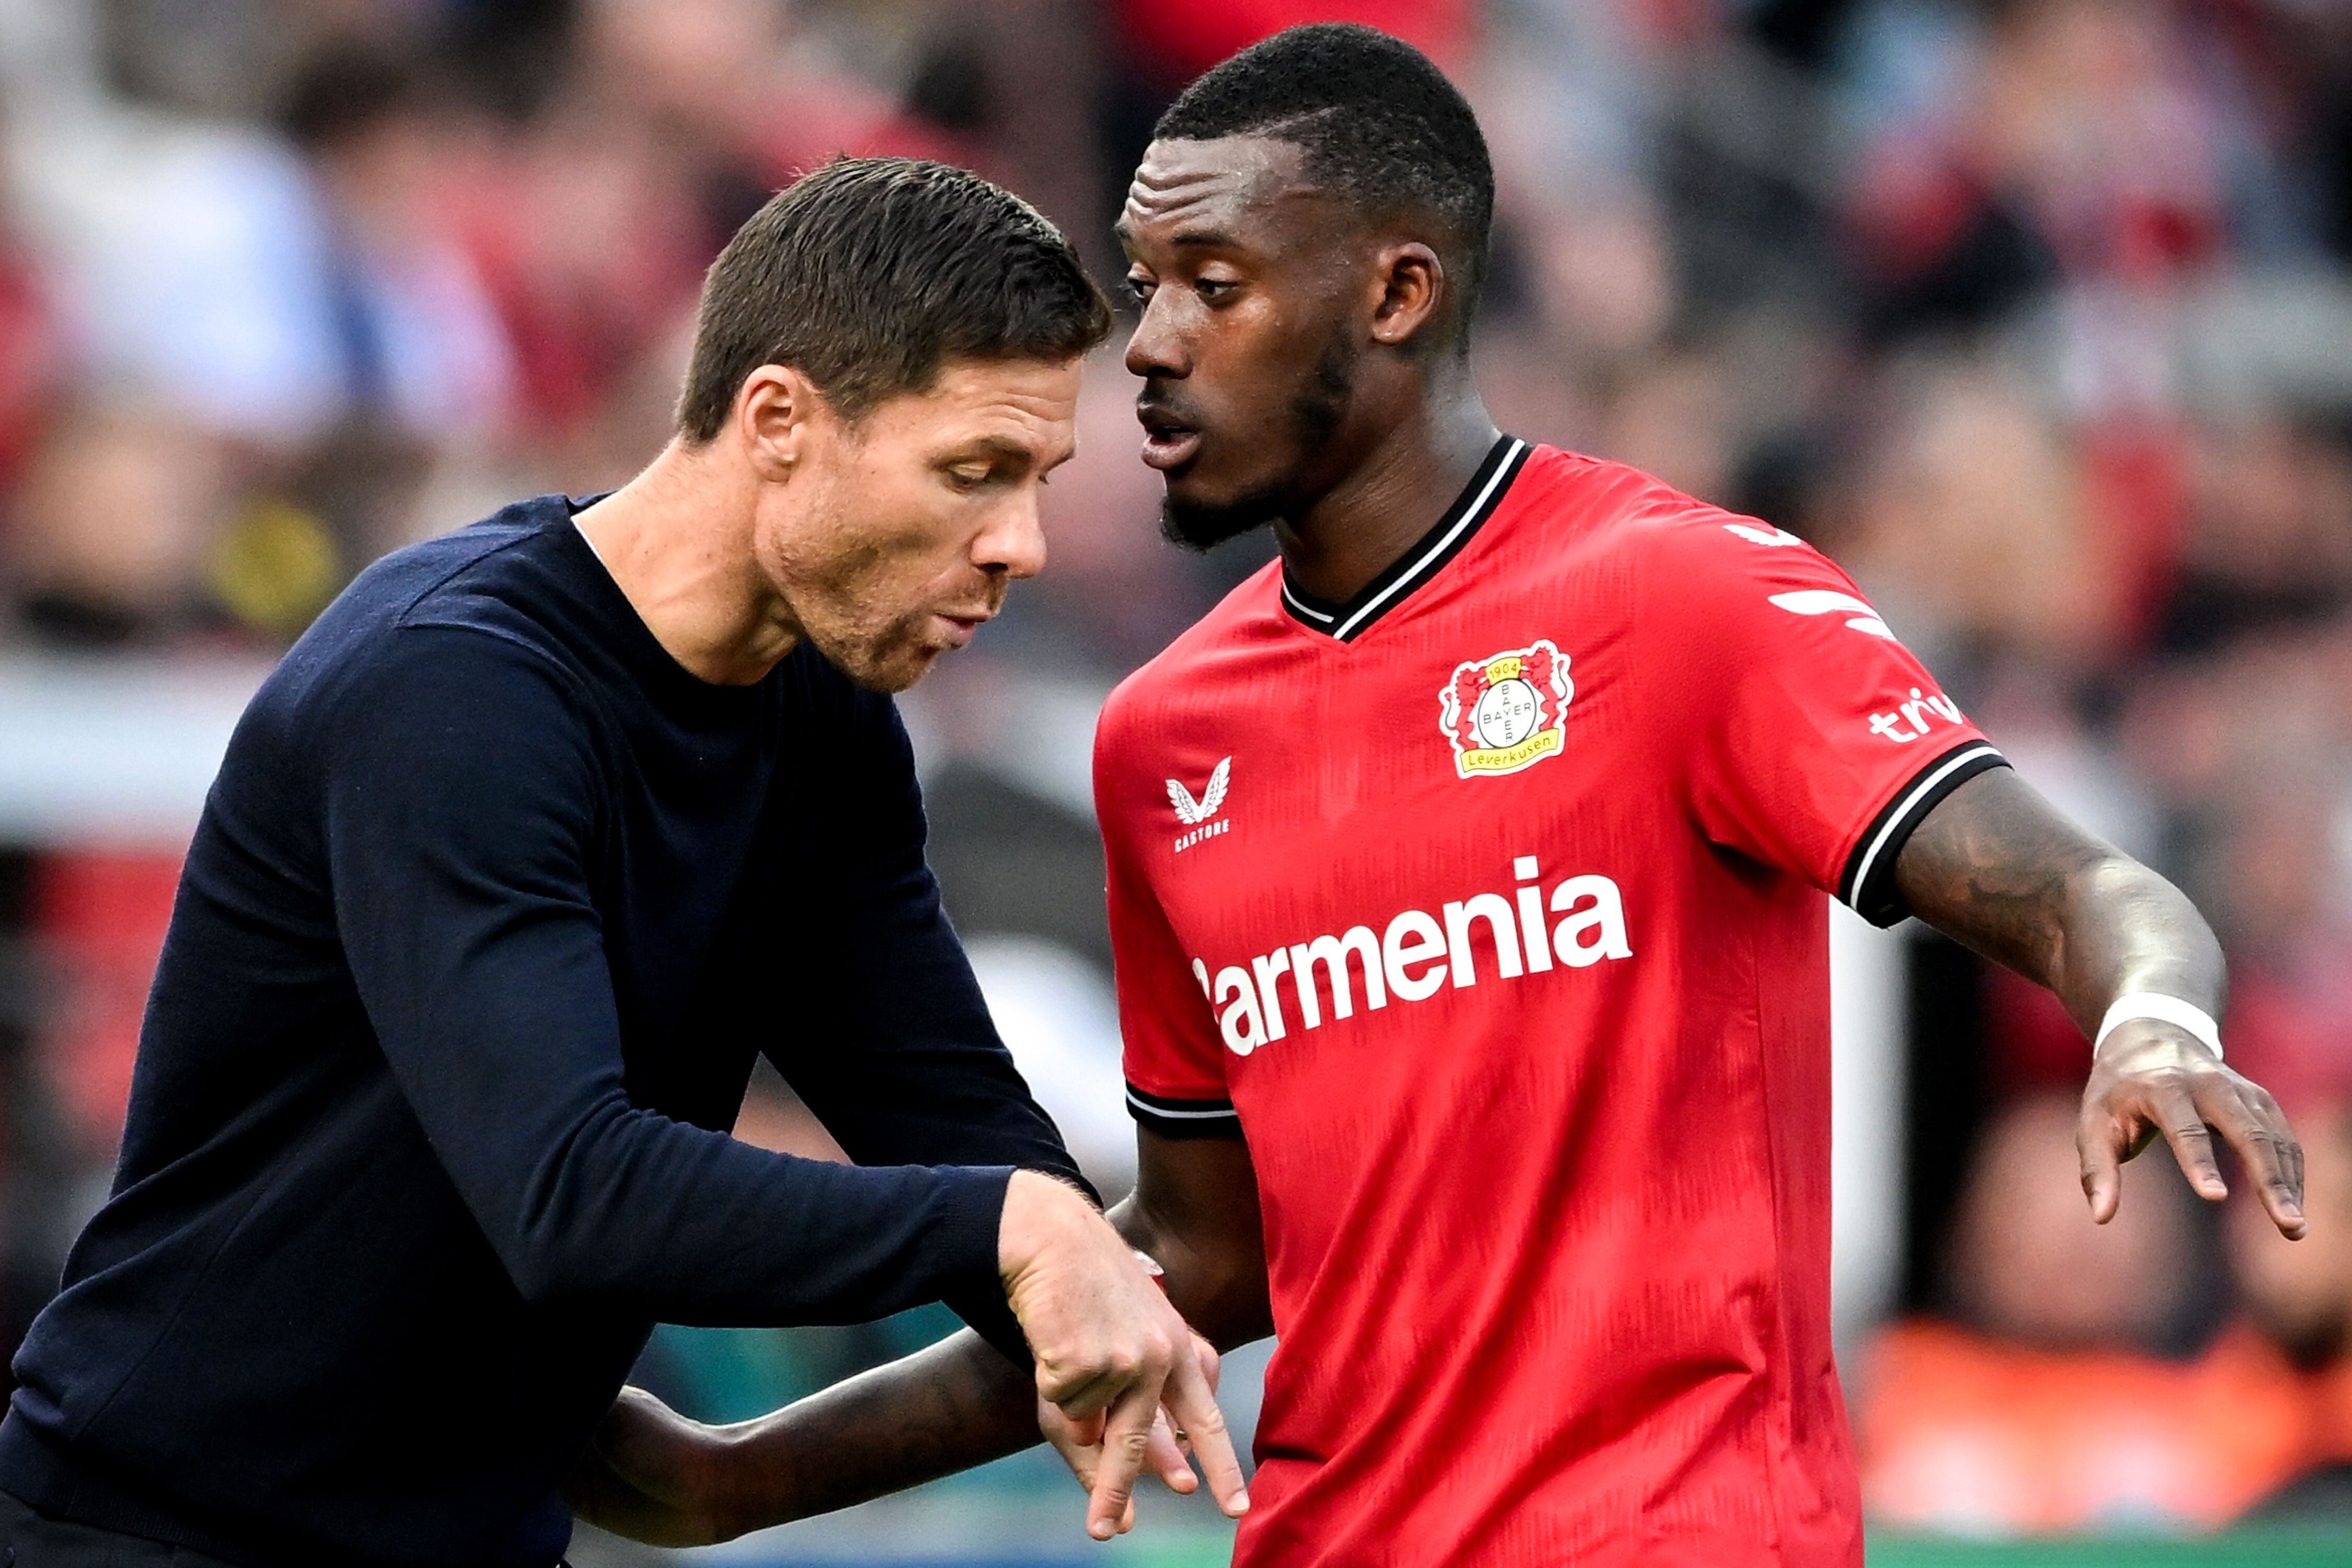 Leverkusen (Germany), 08/10/2022.- Leverkusen's head coach Xabi Alonso (L) gives advise to Leverkusen's Callum Hudson-Odoi (R) during the German Bundesliga soccer match between Bayer Leverkusen and FC Schalke 04 in Leverkusen, Germany, 08 October 2022. (Alemania) EFE/EPA/SASCHA STEINBACH CONDITIONS - ATTENTION: The DFL regulations prohibit any use of photographs as image sequences and/or quasi-video.
